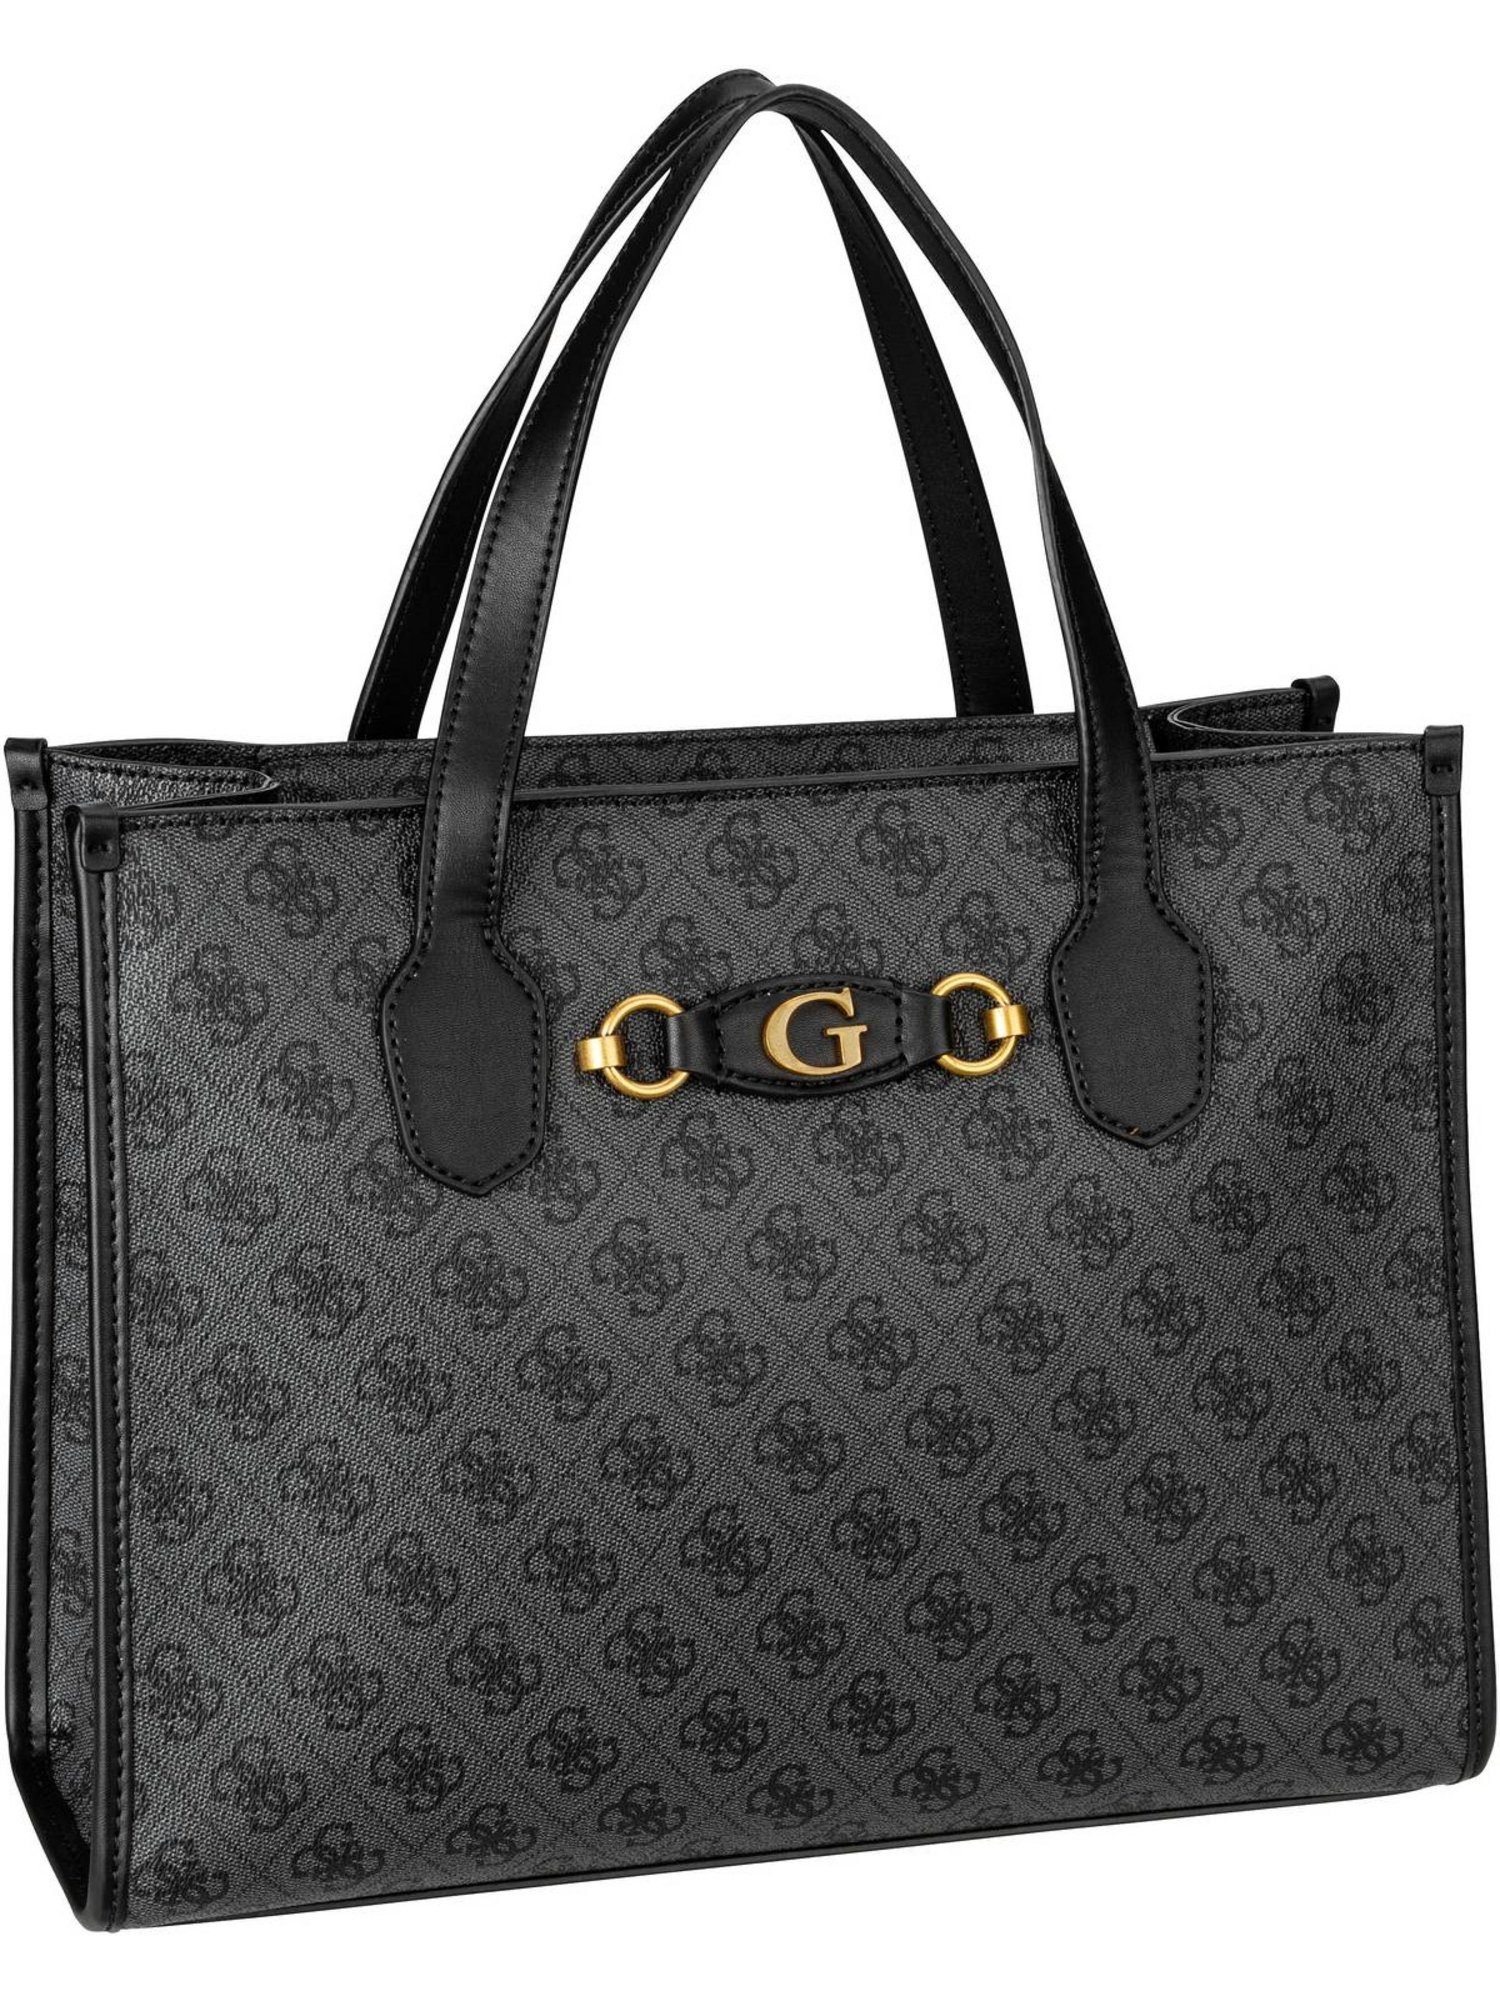 beliebter Saal Guess Handtasche Izzy 2 Compartment Tote, Coal Bag Tote Logo